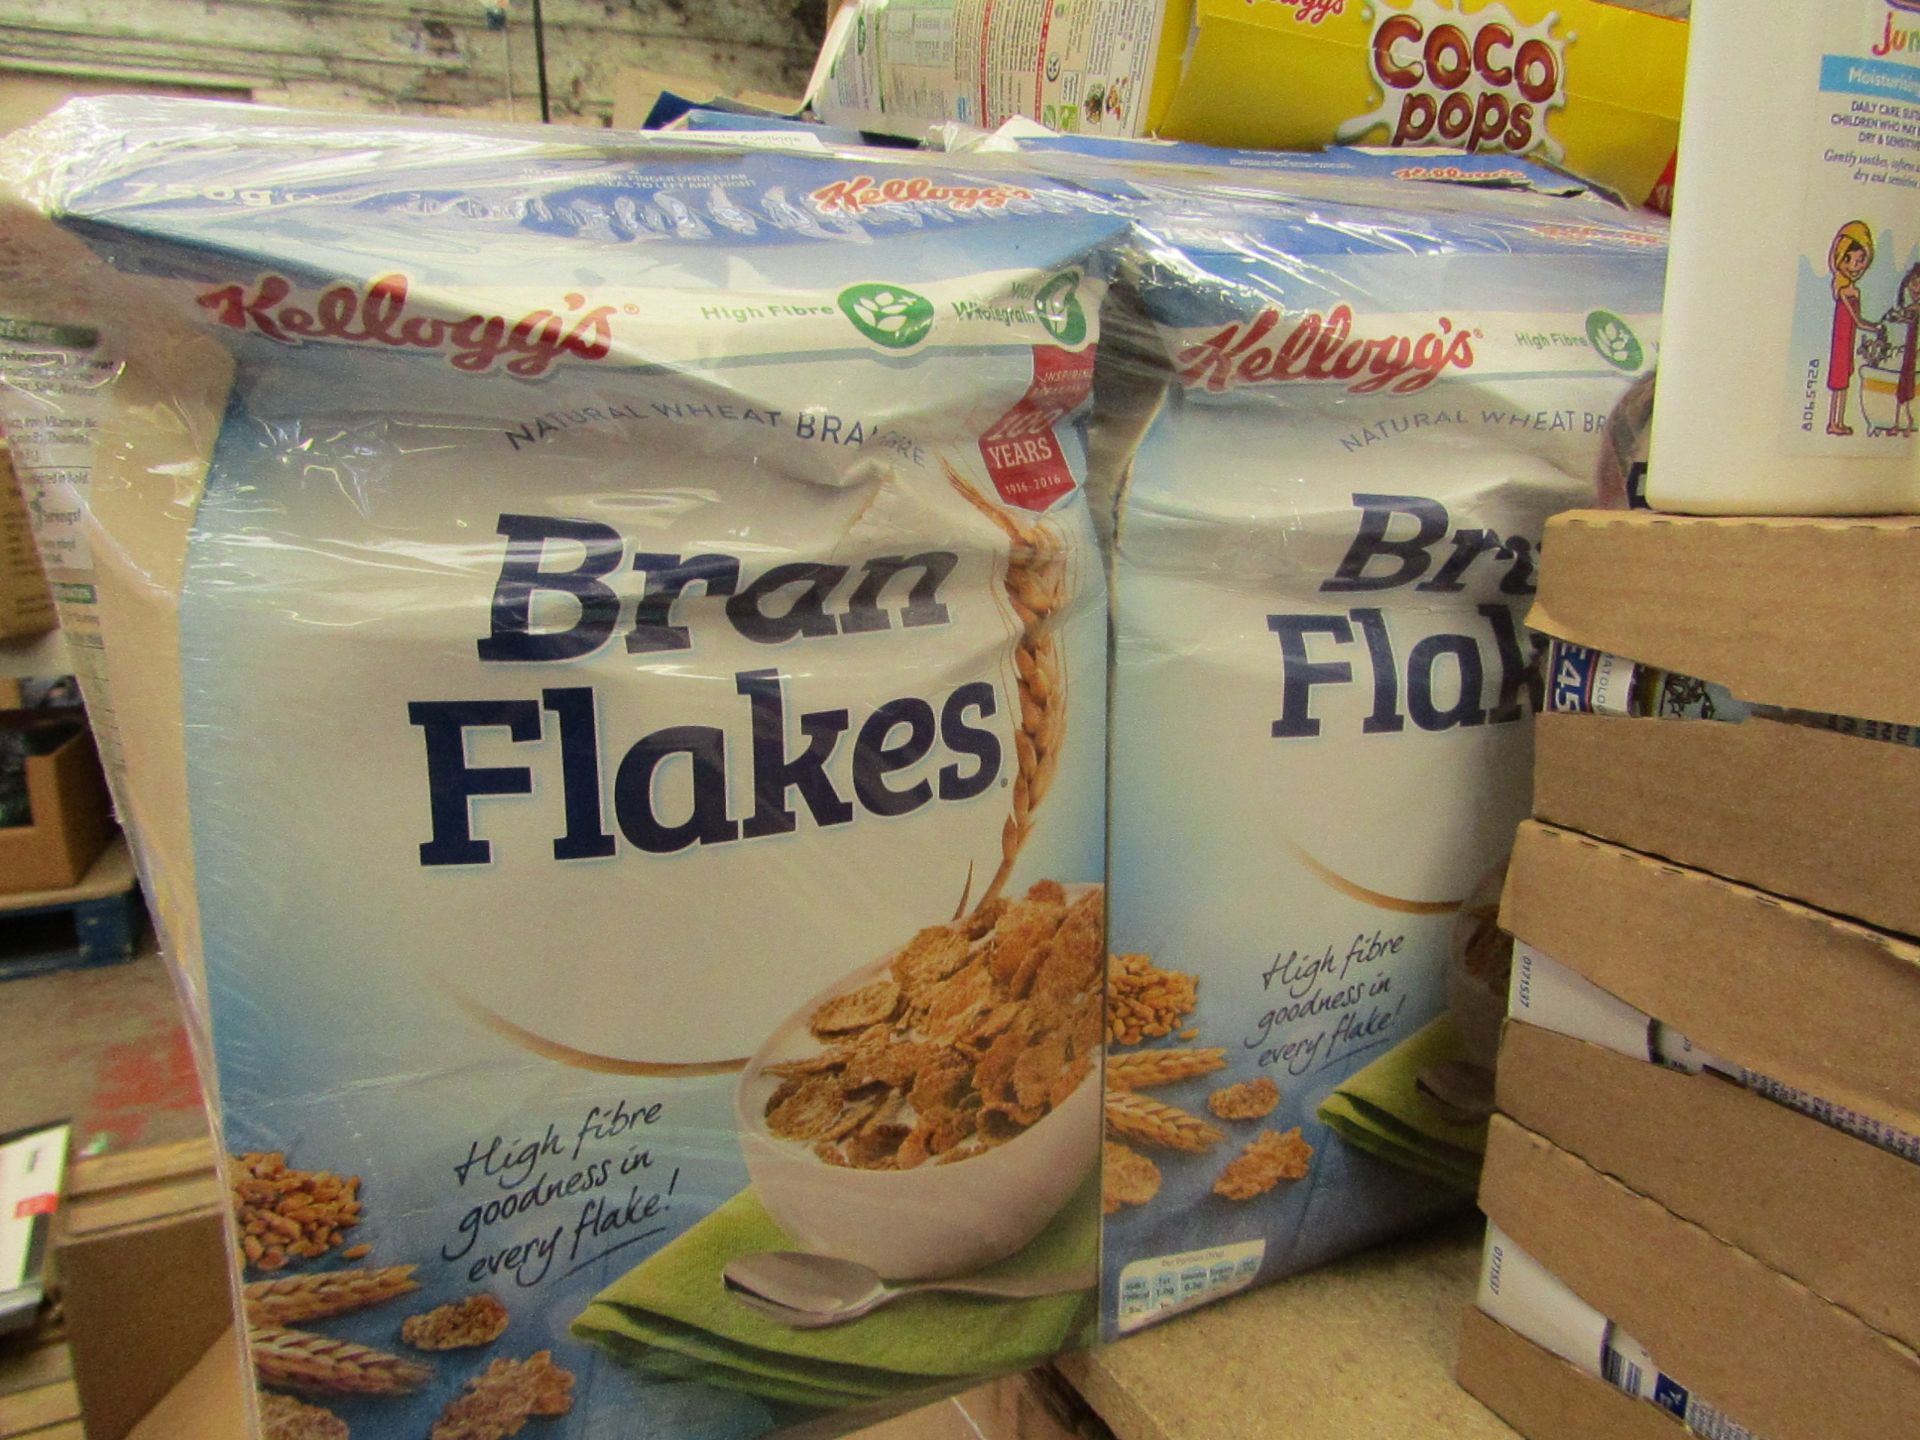 14x 750g boxes containing Kellogg's Bran Flakes. BB: 03/12/18. Some boxes may be damaged.